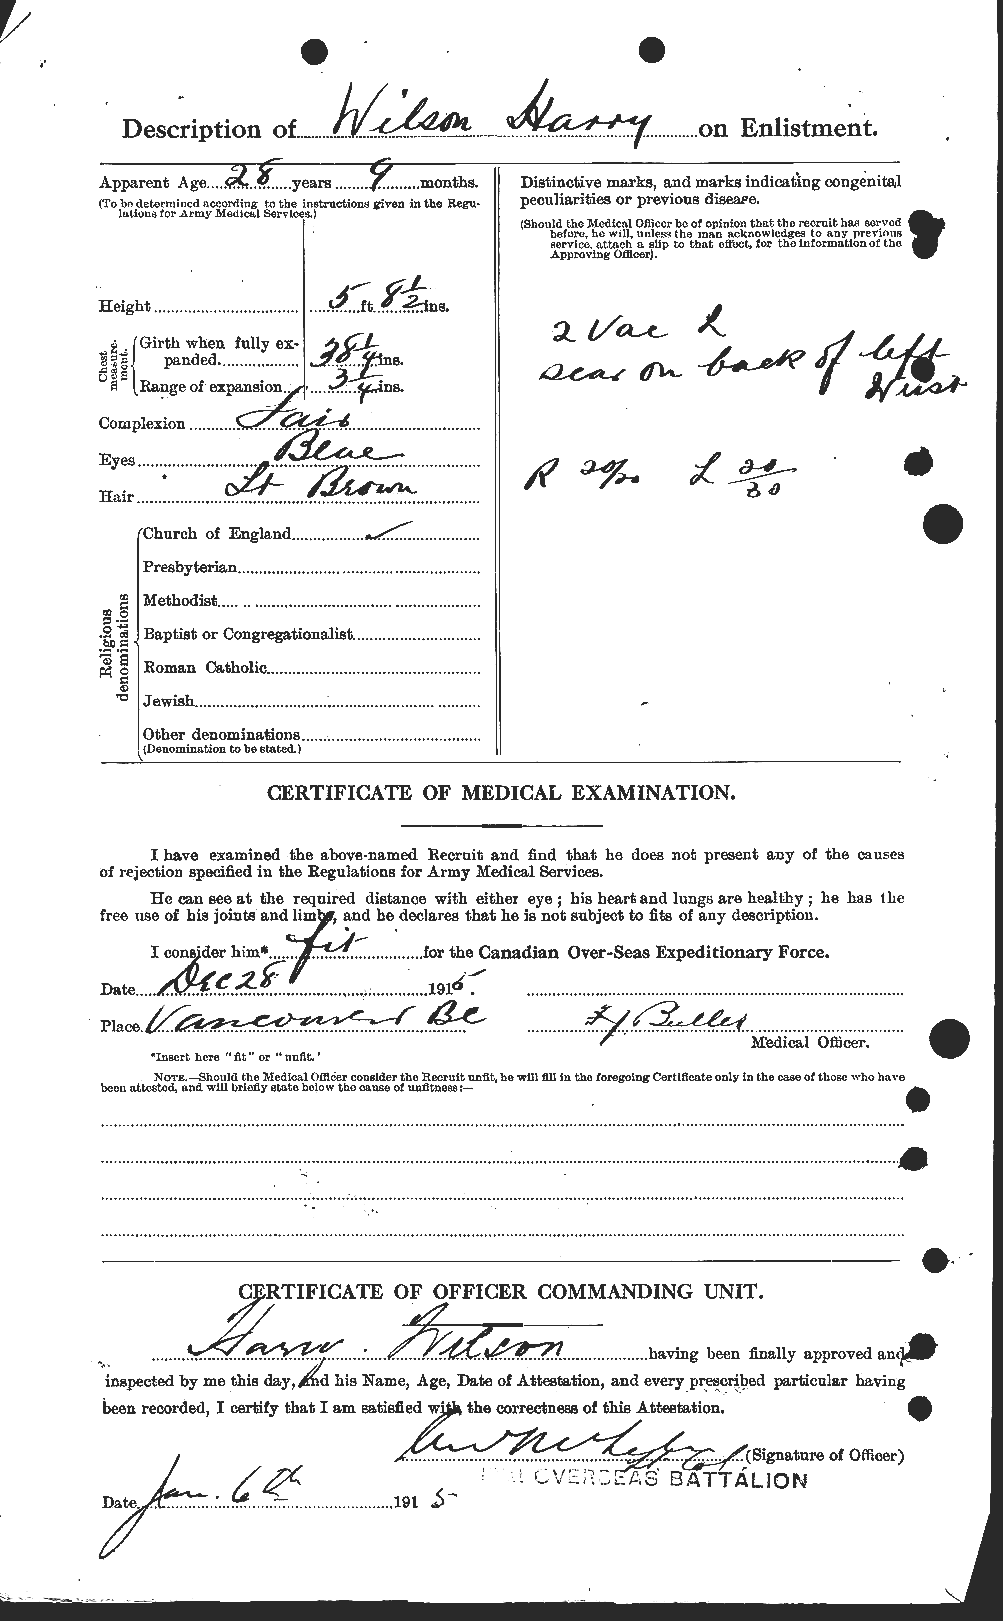 Personnel Records of the First World War - CEF 679428b